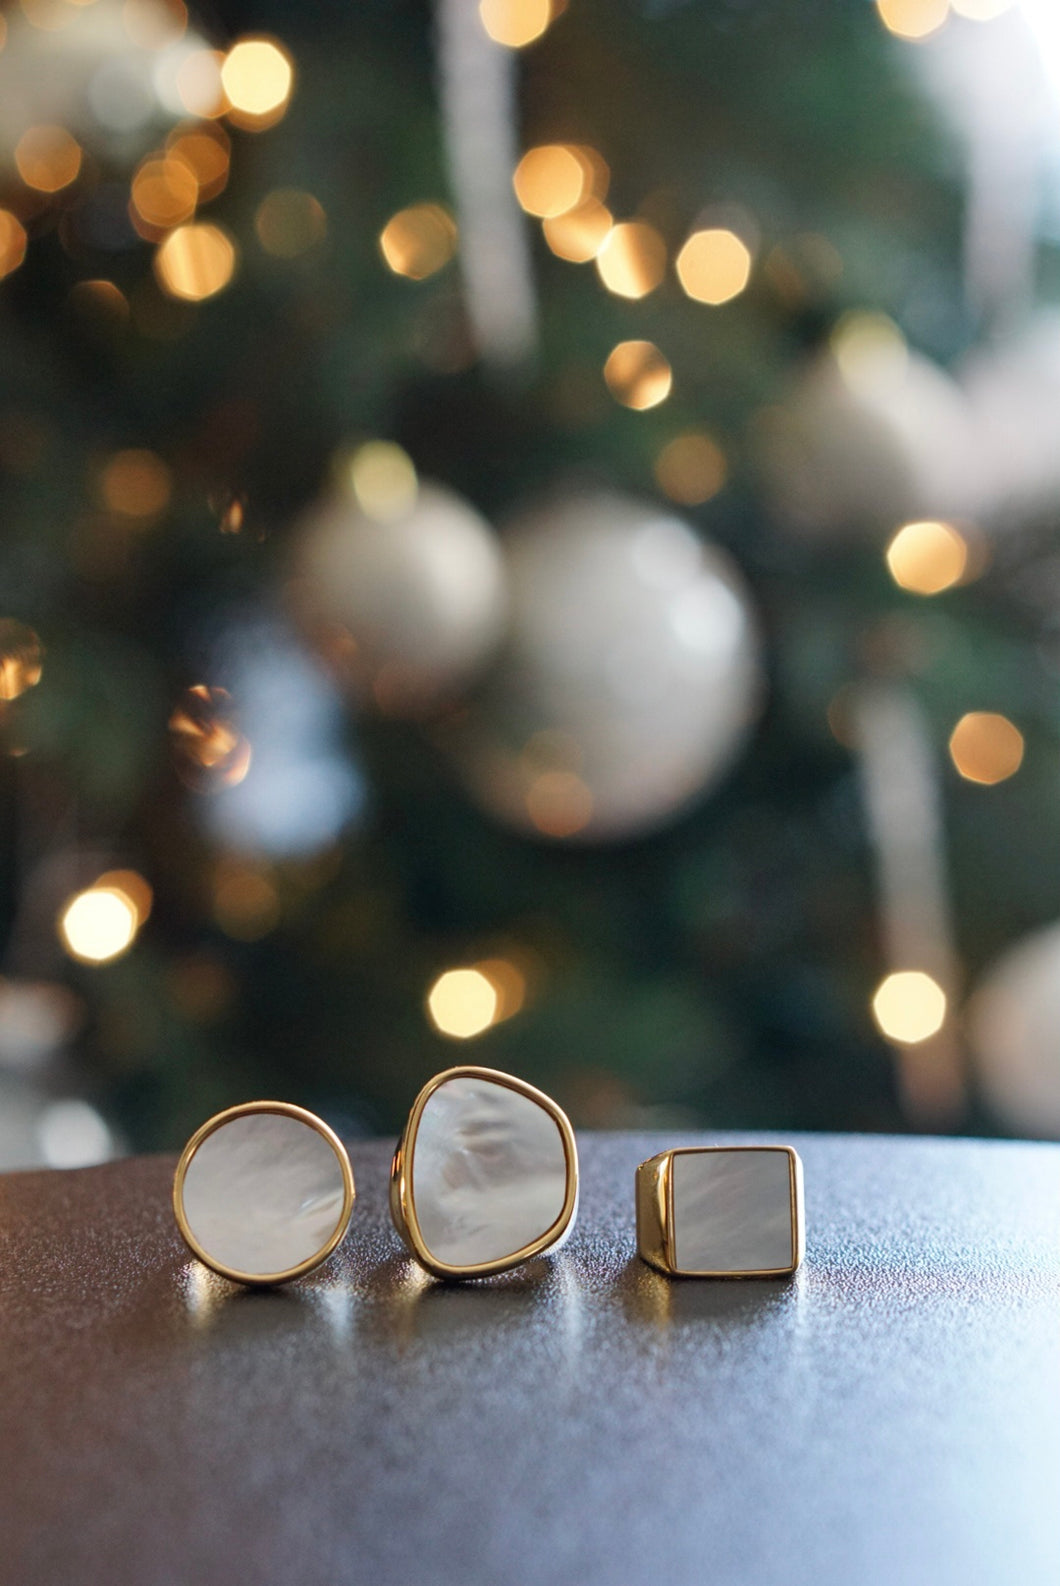  Lineup of 3 rings (from left to right): Aria, Elisa, and Camila rings with lit Christmas tree in background. 